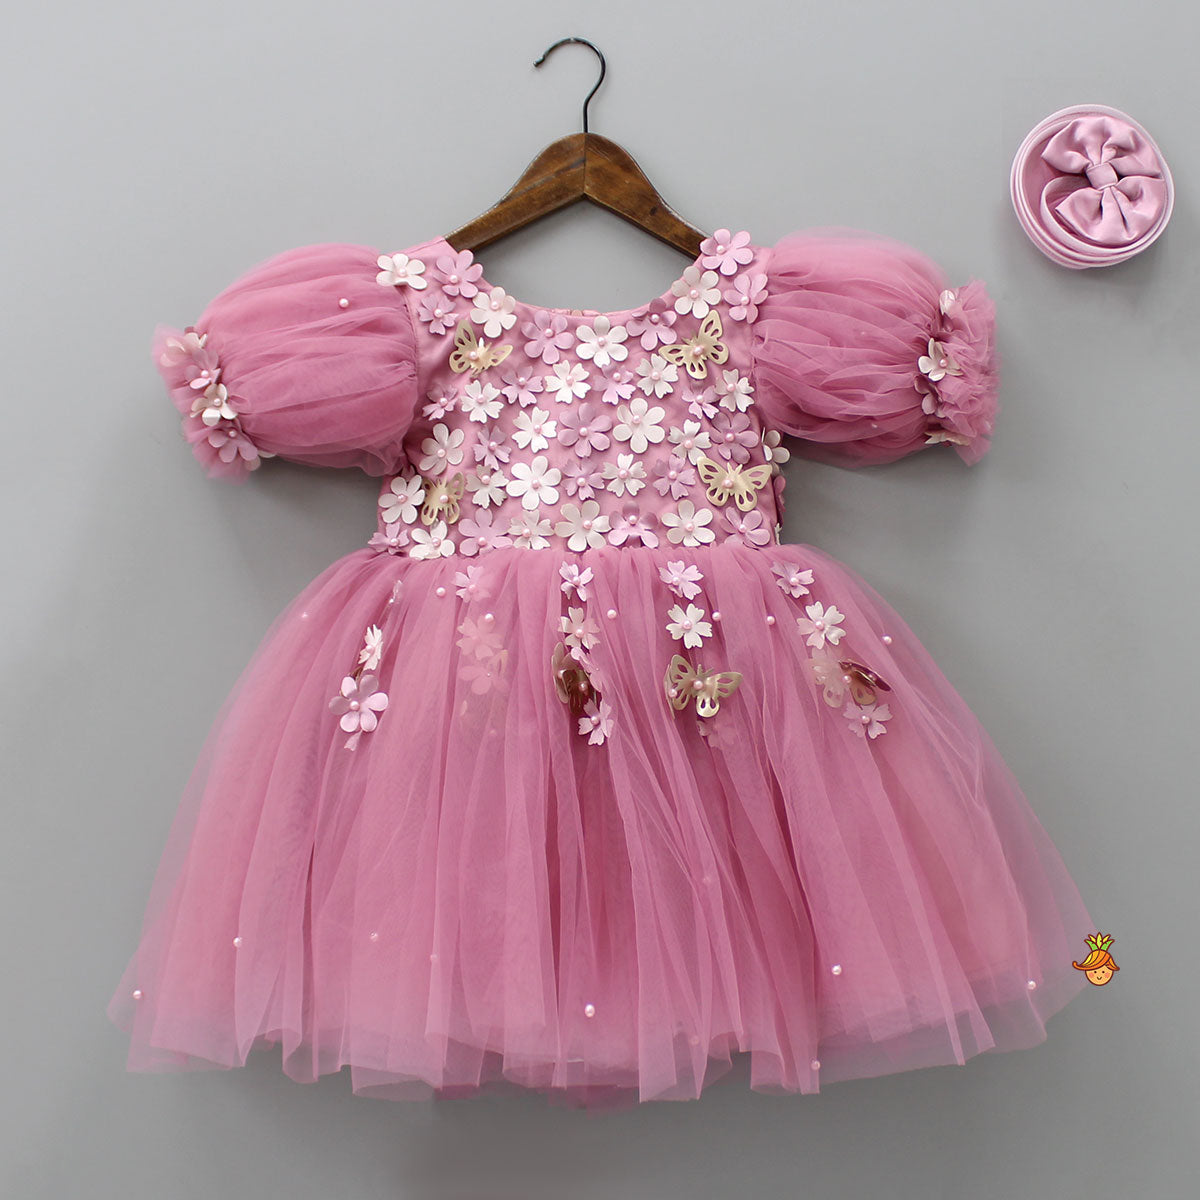 Pre Order: Flower Enhanced Pink Butterfly Wings Dress With Head Band